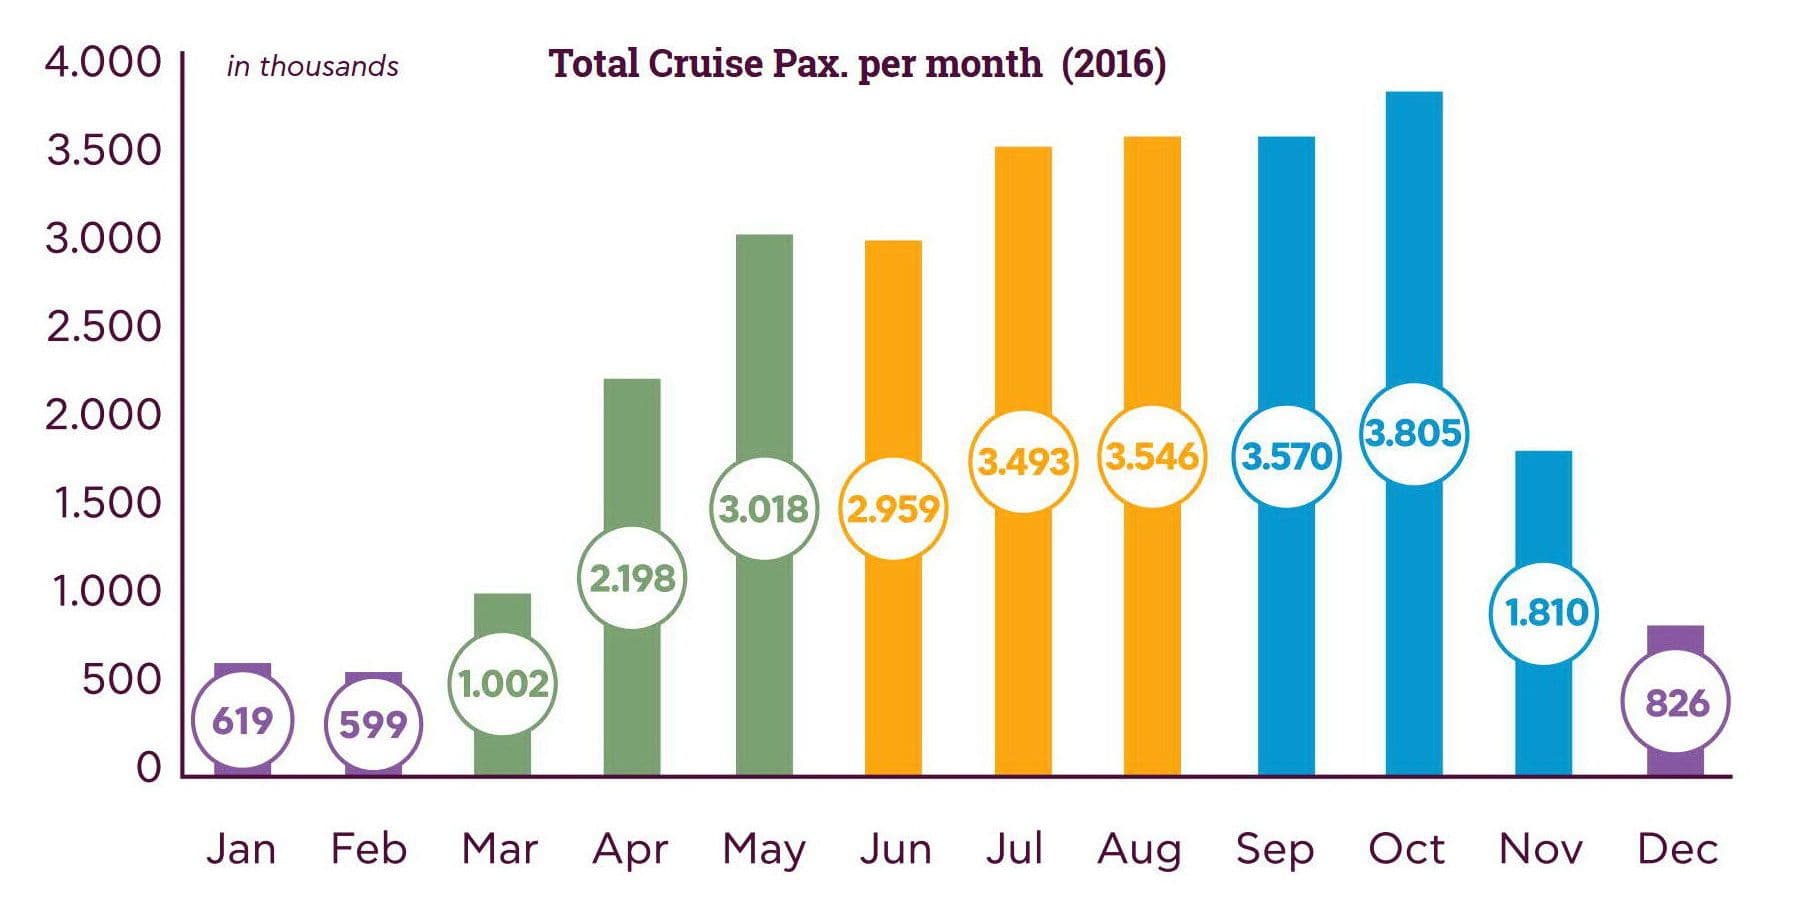 Total Cruise Pax. per month_2016